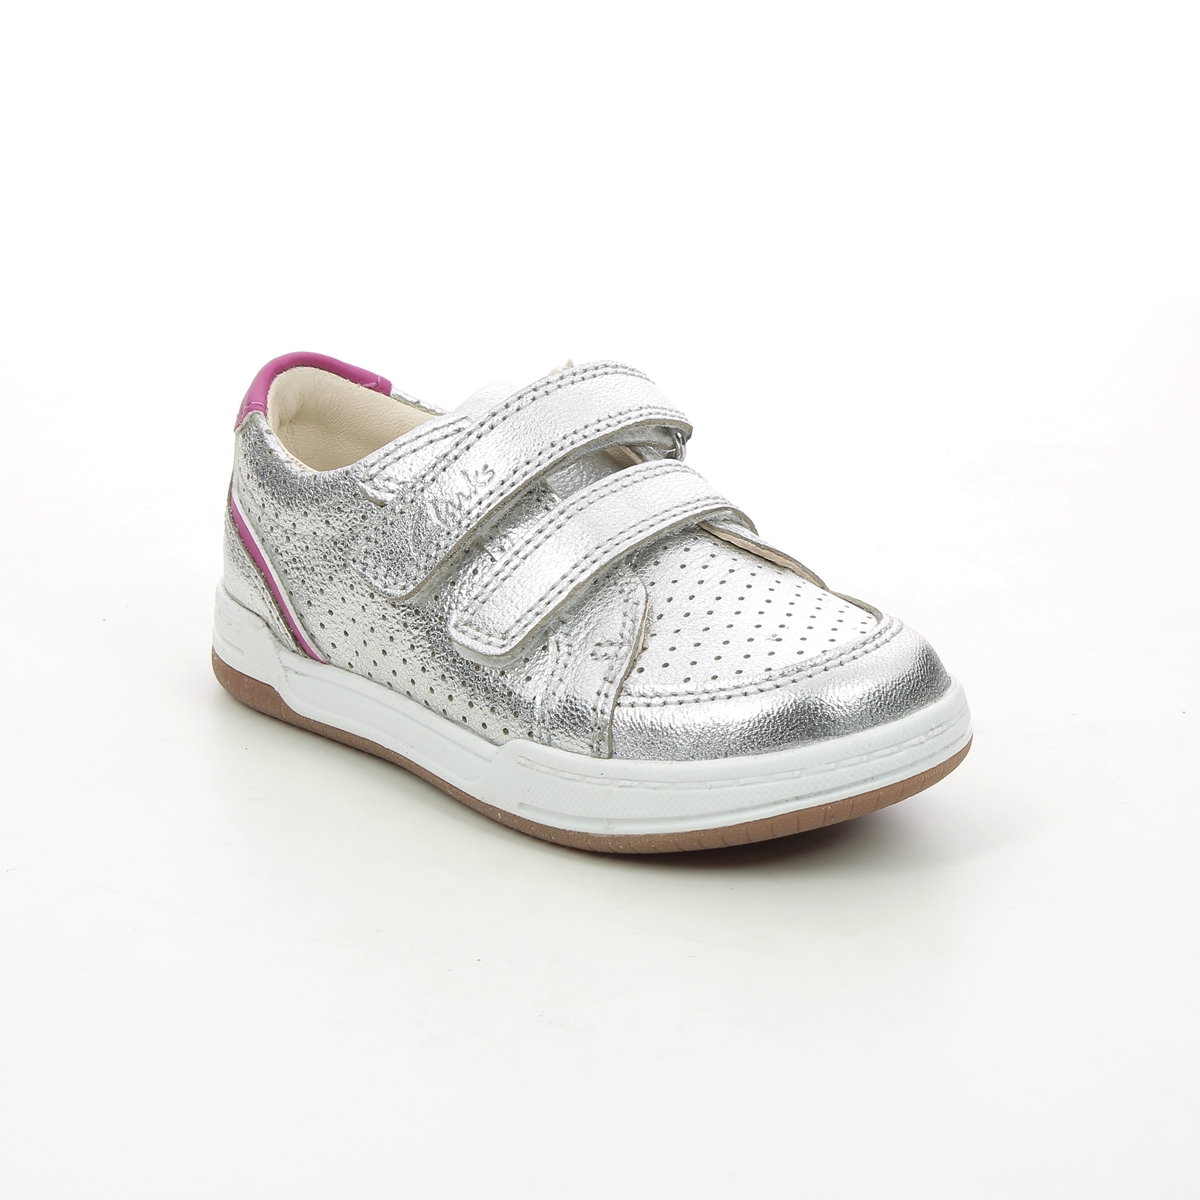 Clarks Fawn Solo T Silver Kids First And Toddler 624606F In Size 5.5 In Plain Silver F Width Fitting Regular Fit For kids